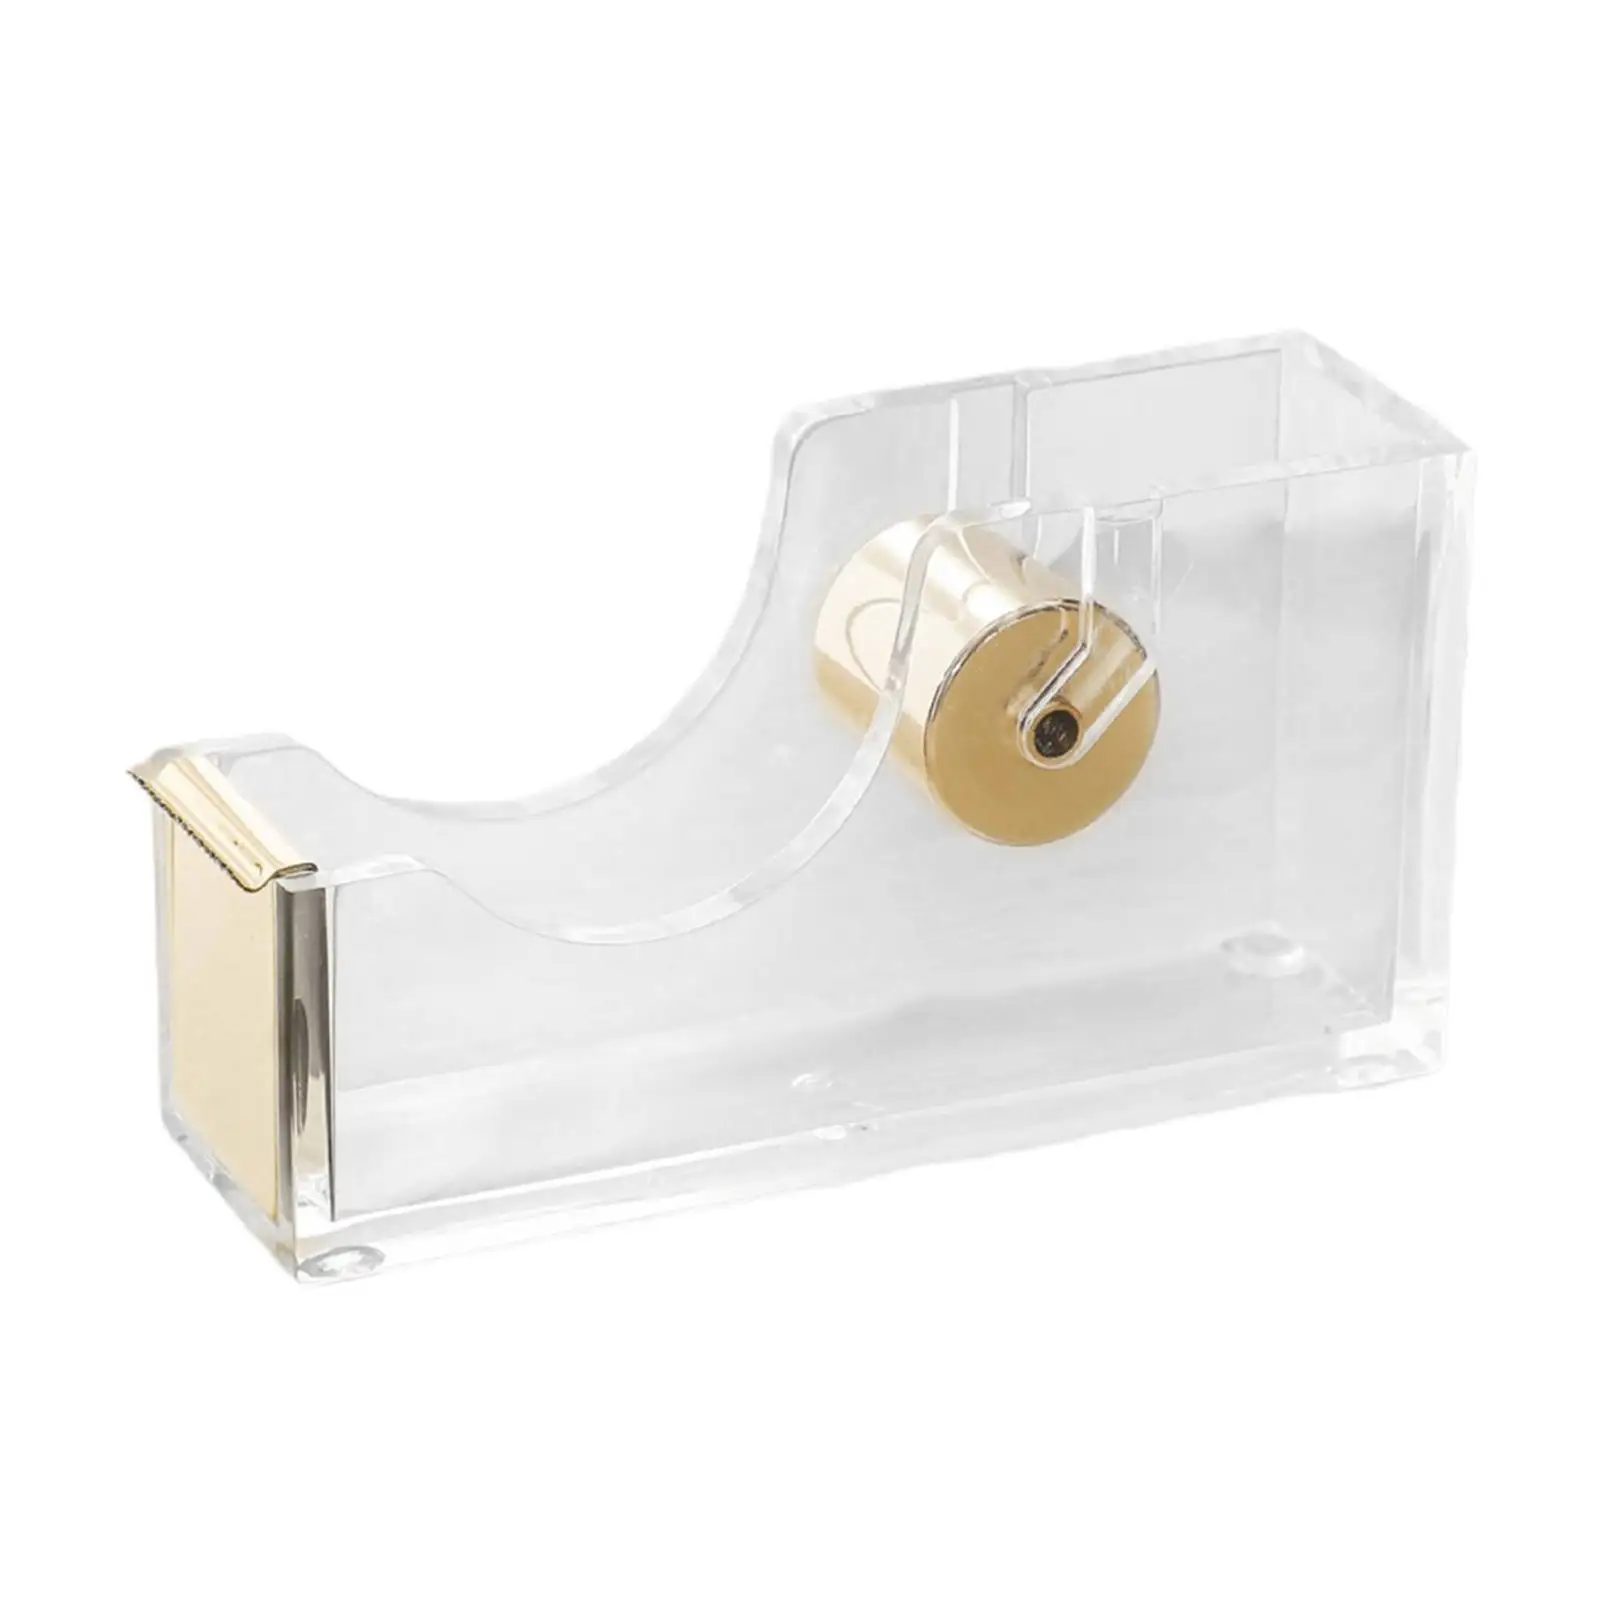 1 Piece Tape Cutter Acrylic Clear Organization Accs Available Stationery Holder Portable Modern for Office Desktop School Home